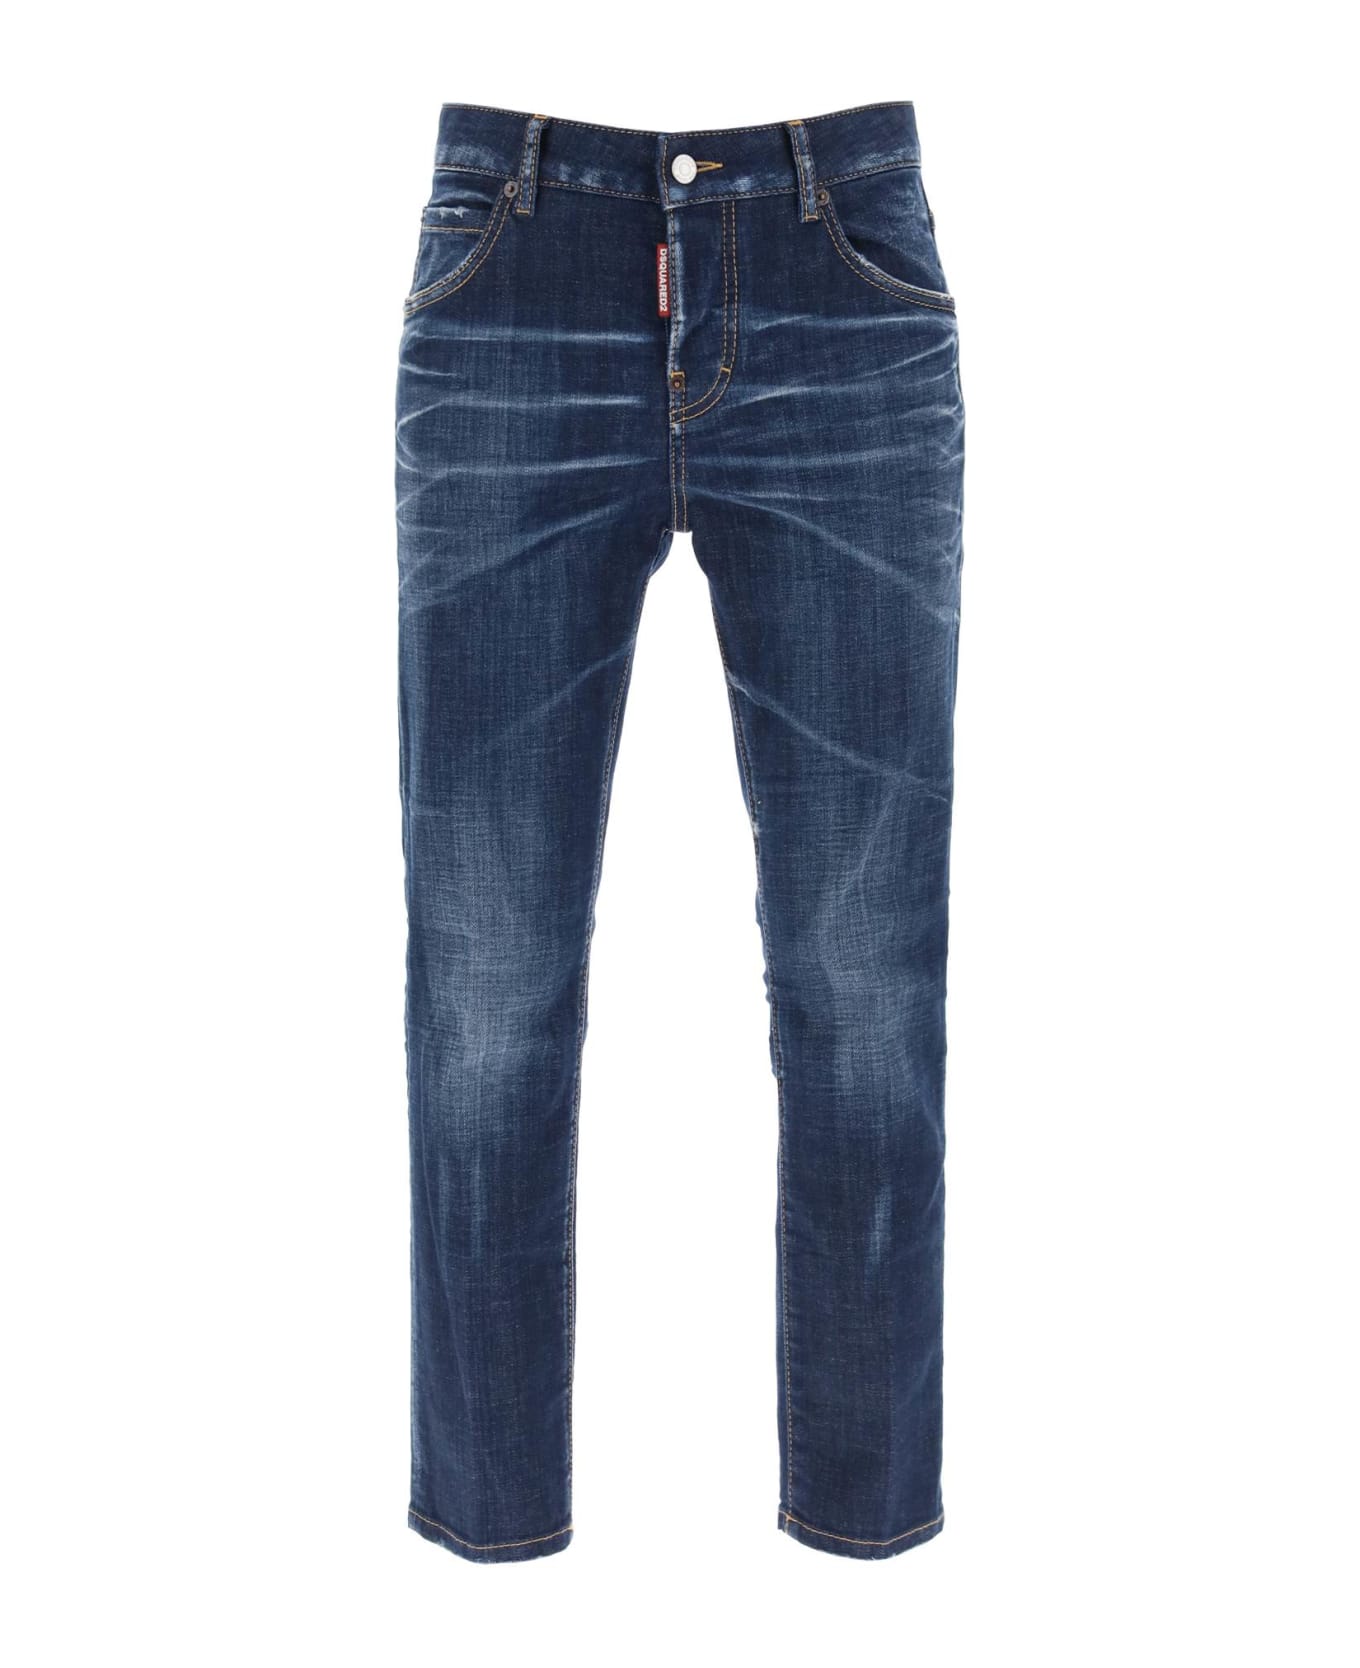 Dsquared2 'cool Girl' Jeans - NAVY BLUE (Blue)